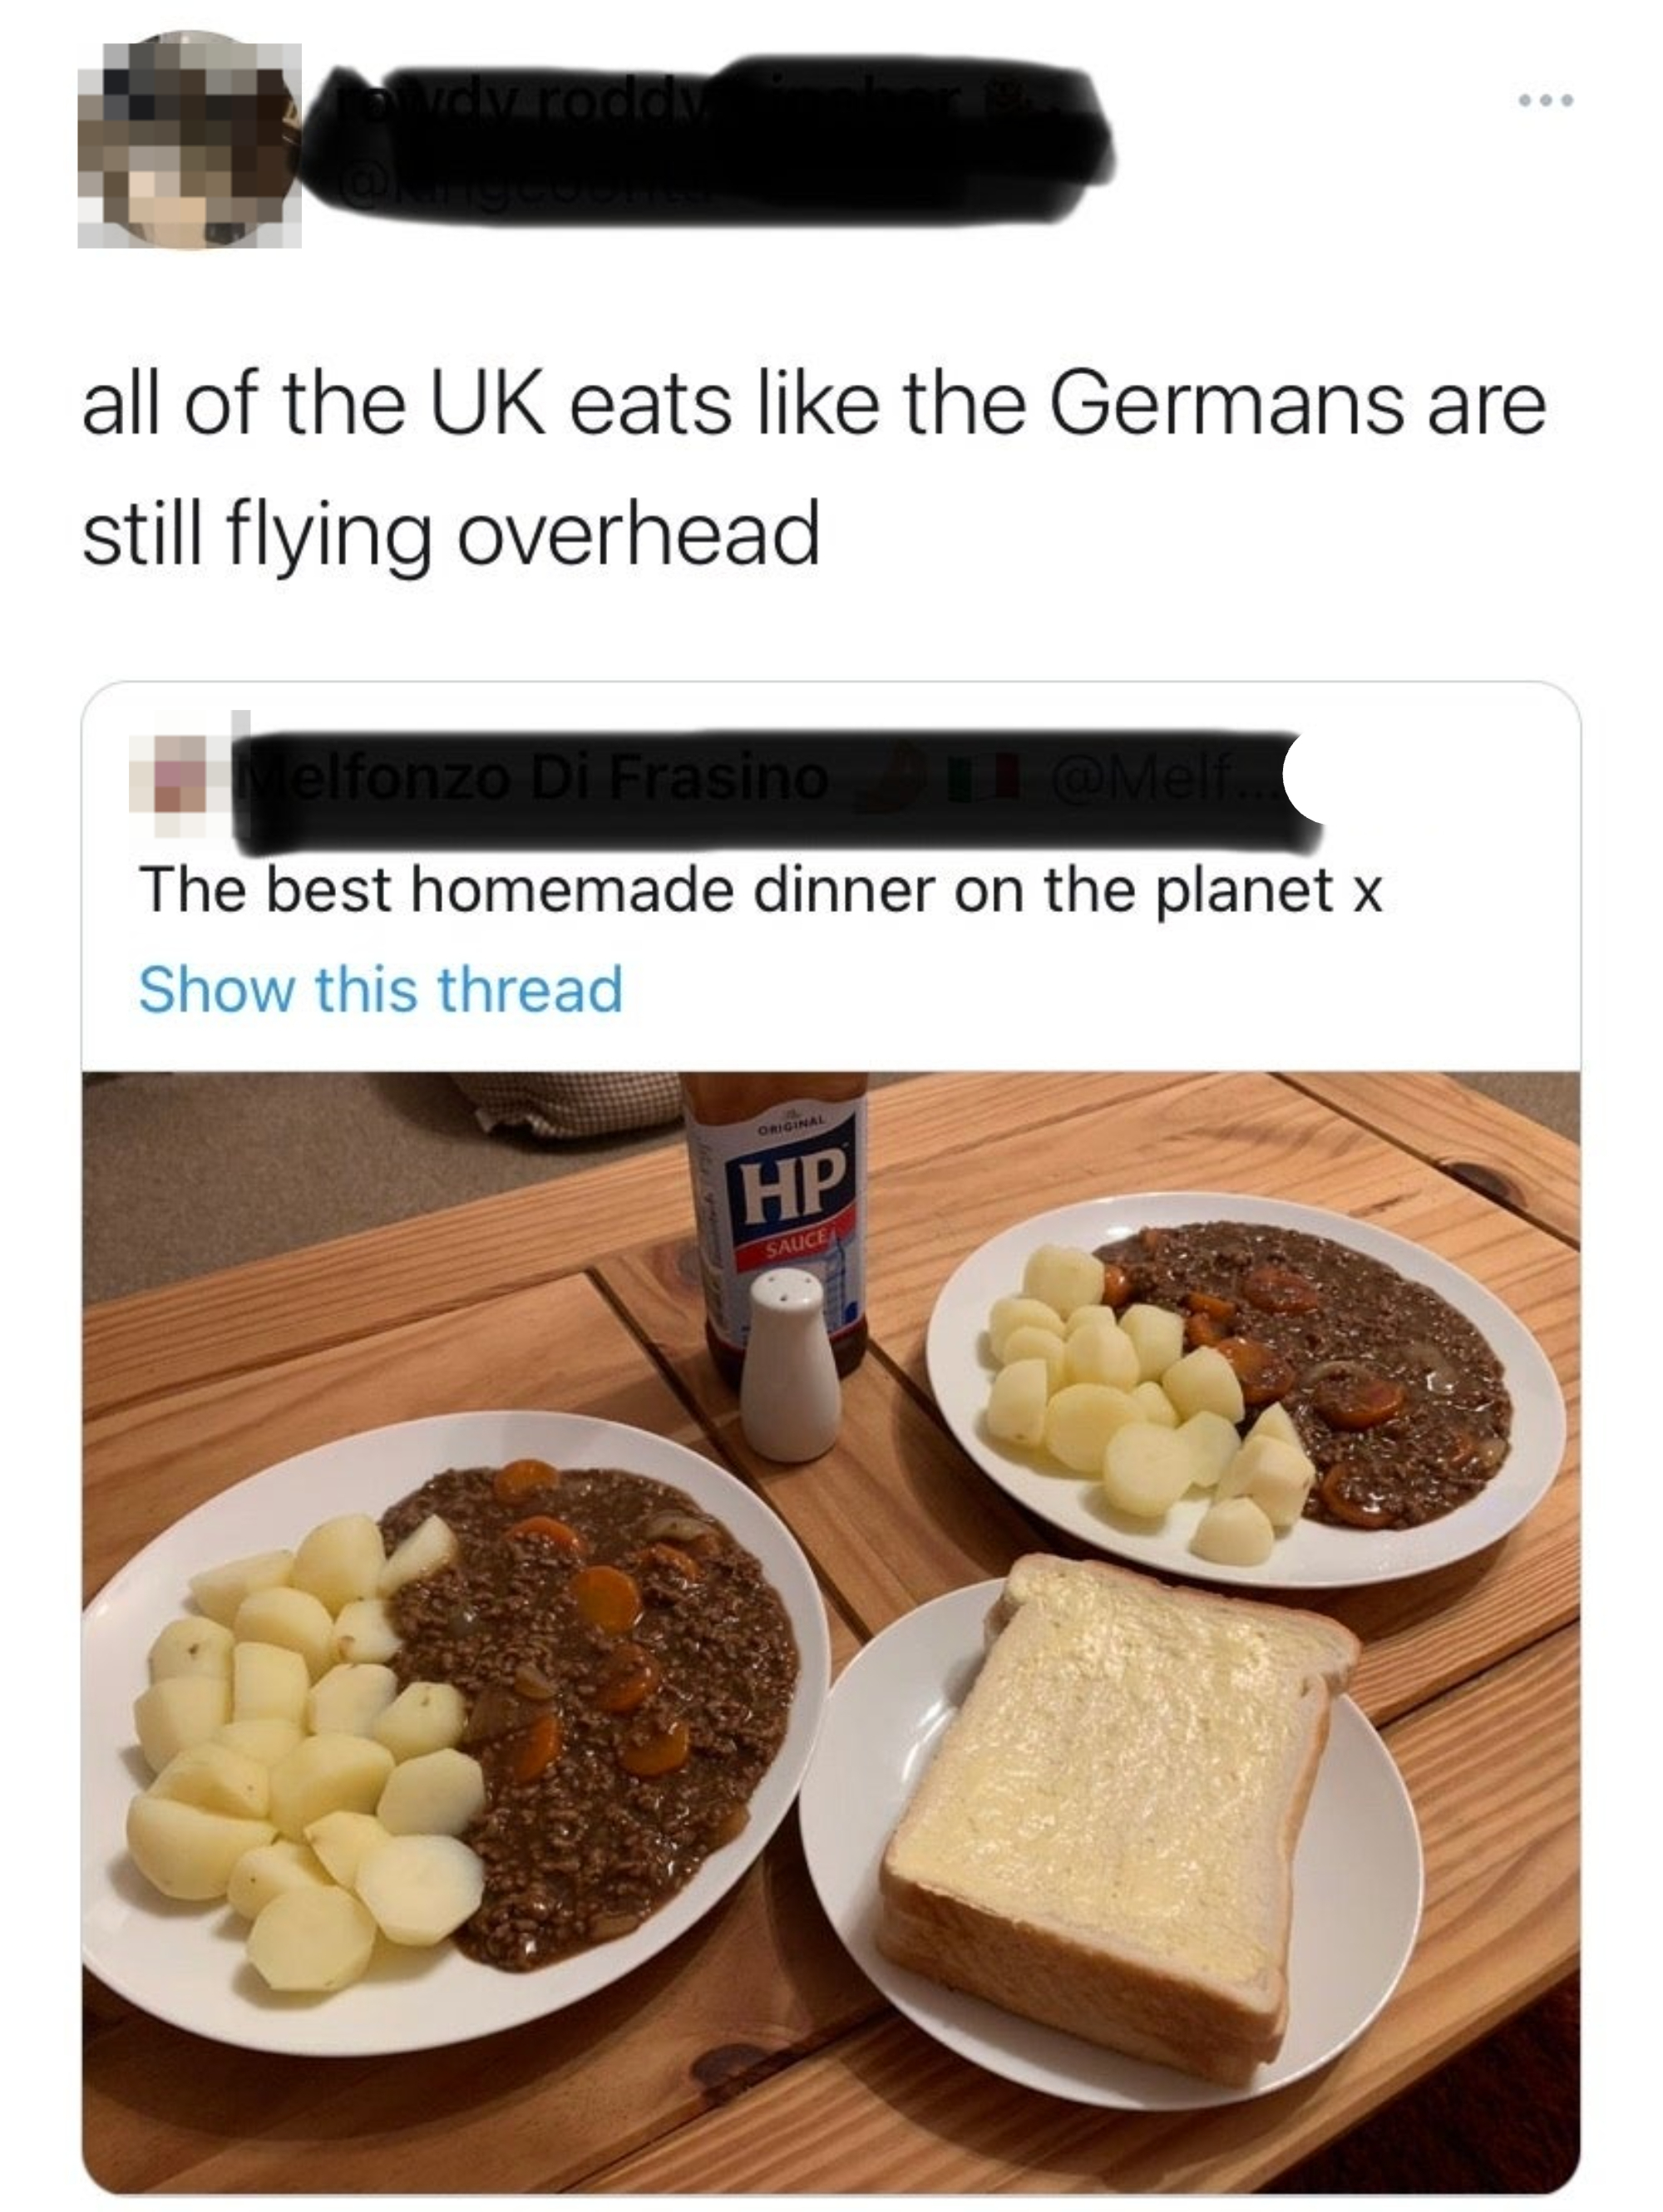 Someone posts &quot;the best homemade dinner on the planet&quot; and a picture of boiled potatoes, buttered bread, and a meat stew with carrots, and the response is, &quot;All of the UK eats like the Germans are still flying overhead&quot;